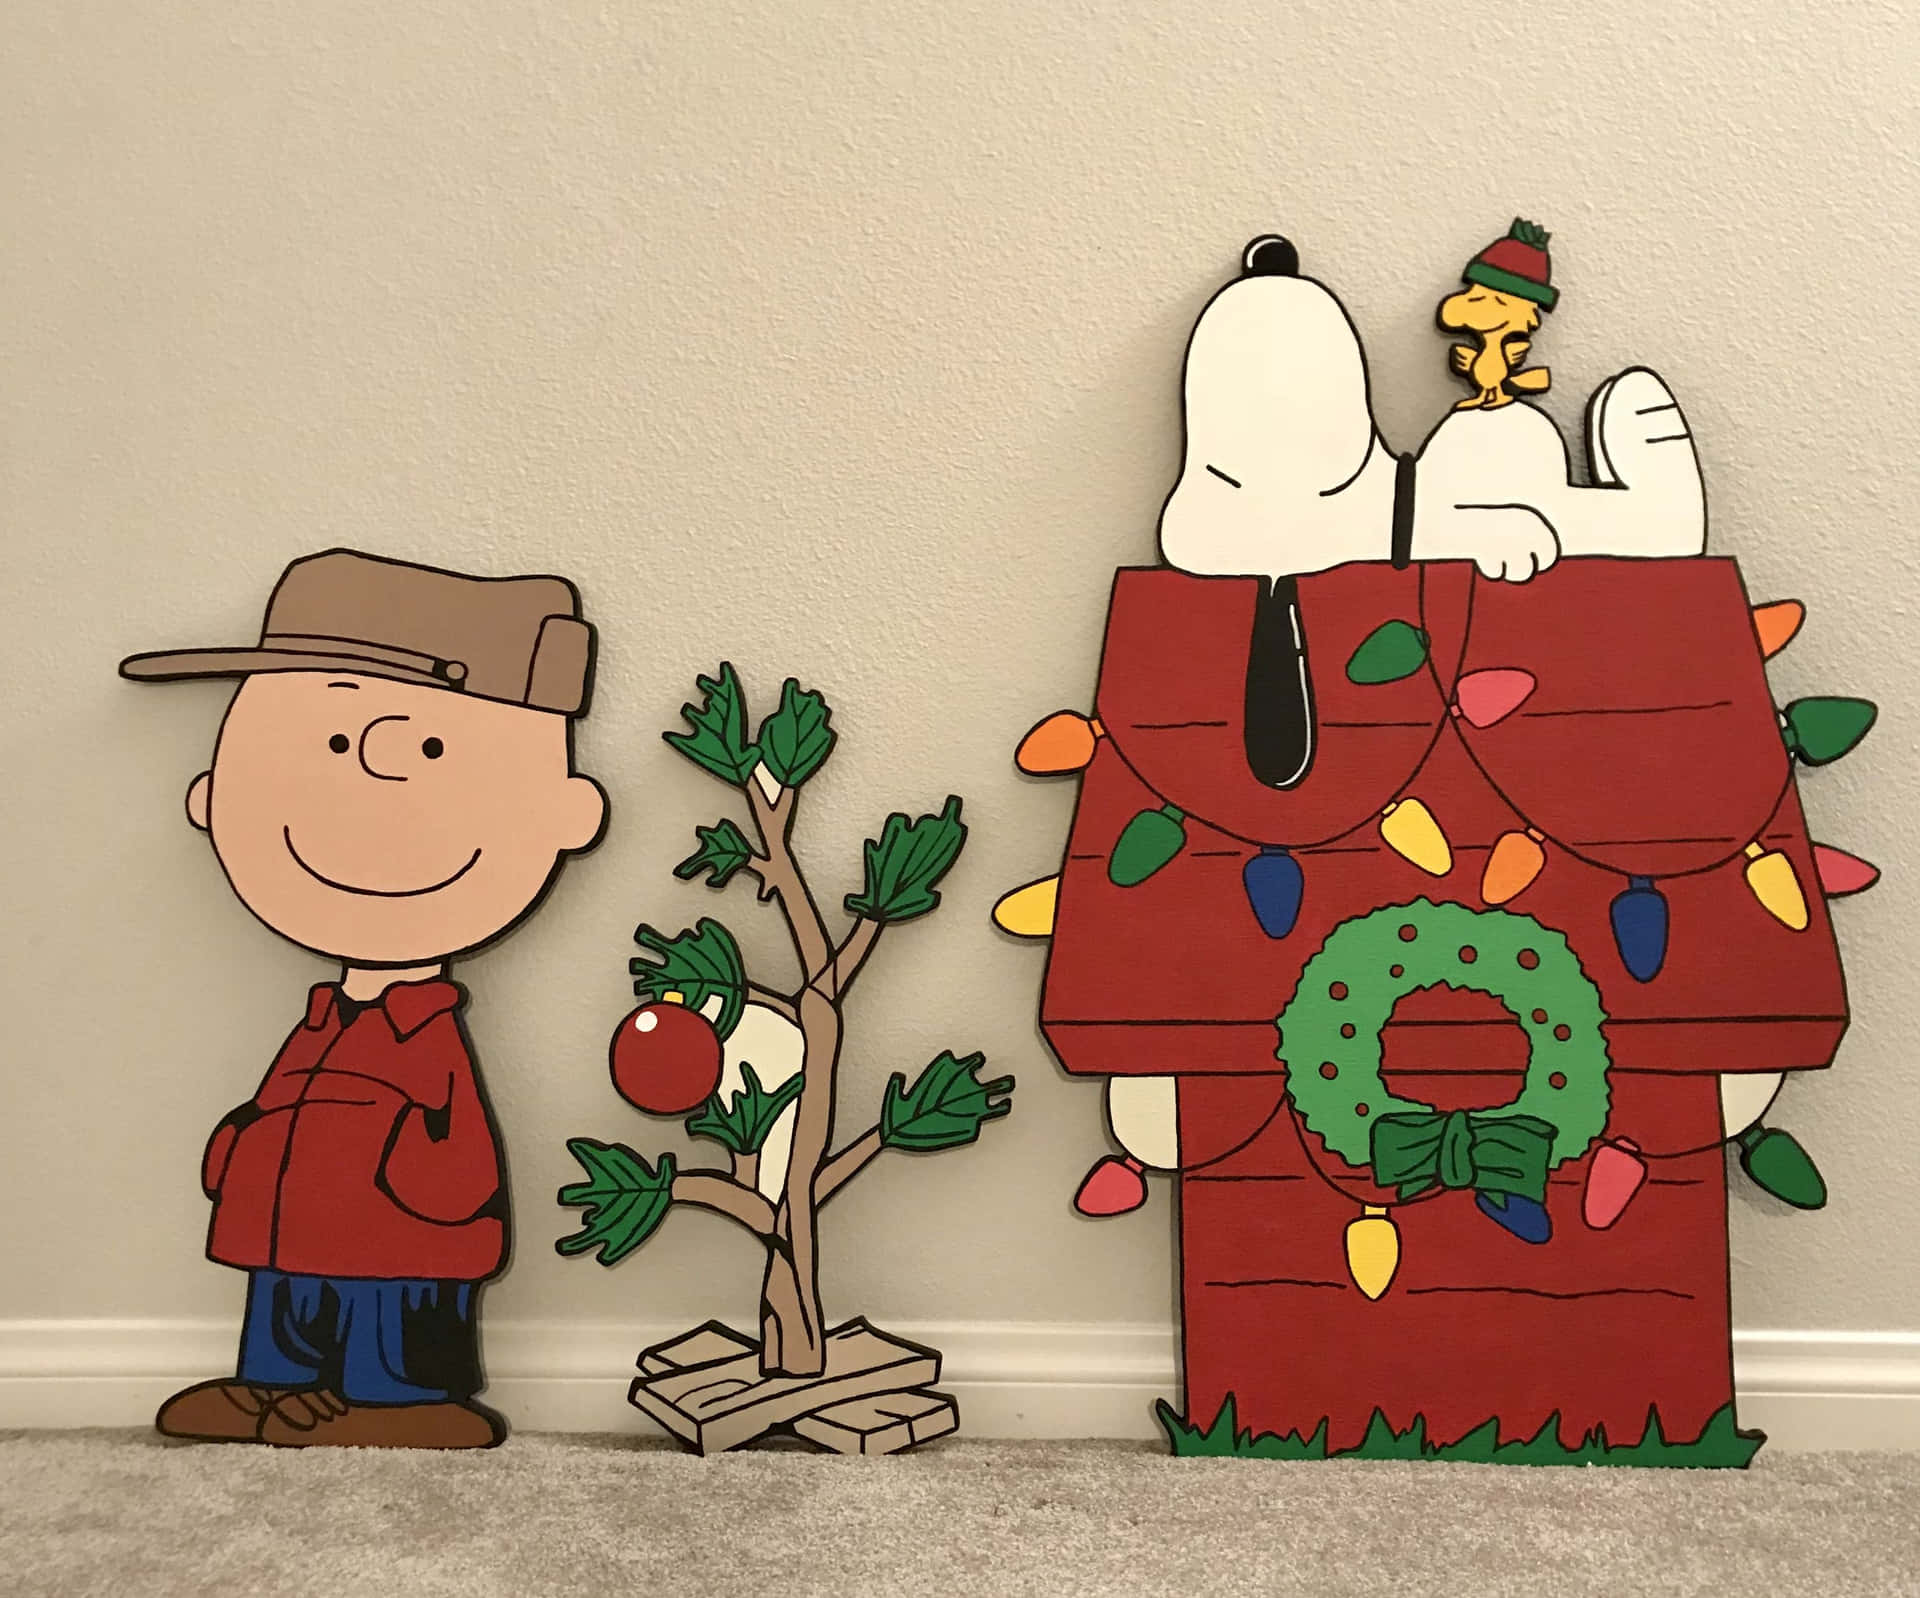 Celebrate the holiday season with the Peanuts gang! Wallpaper